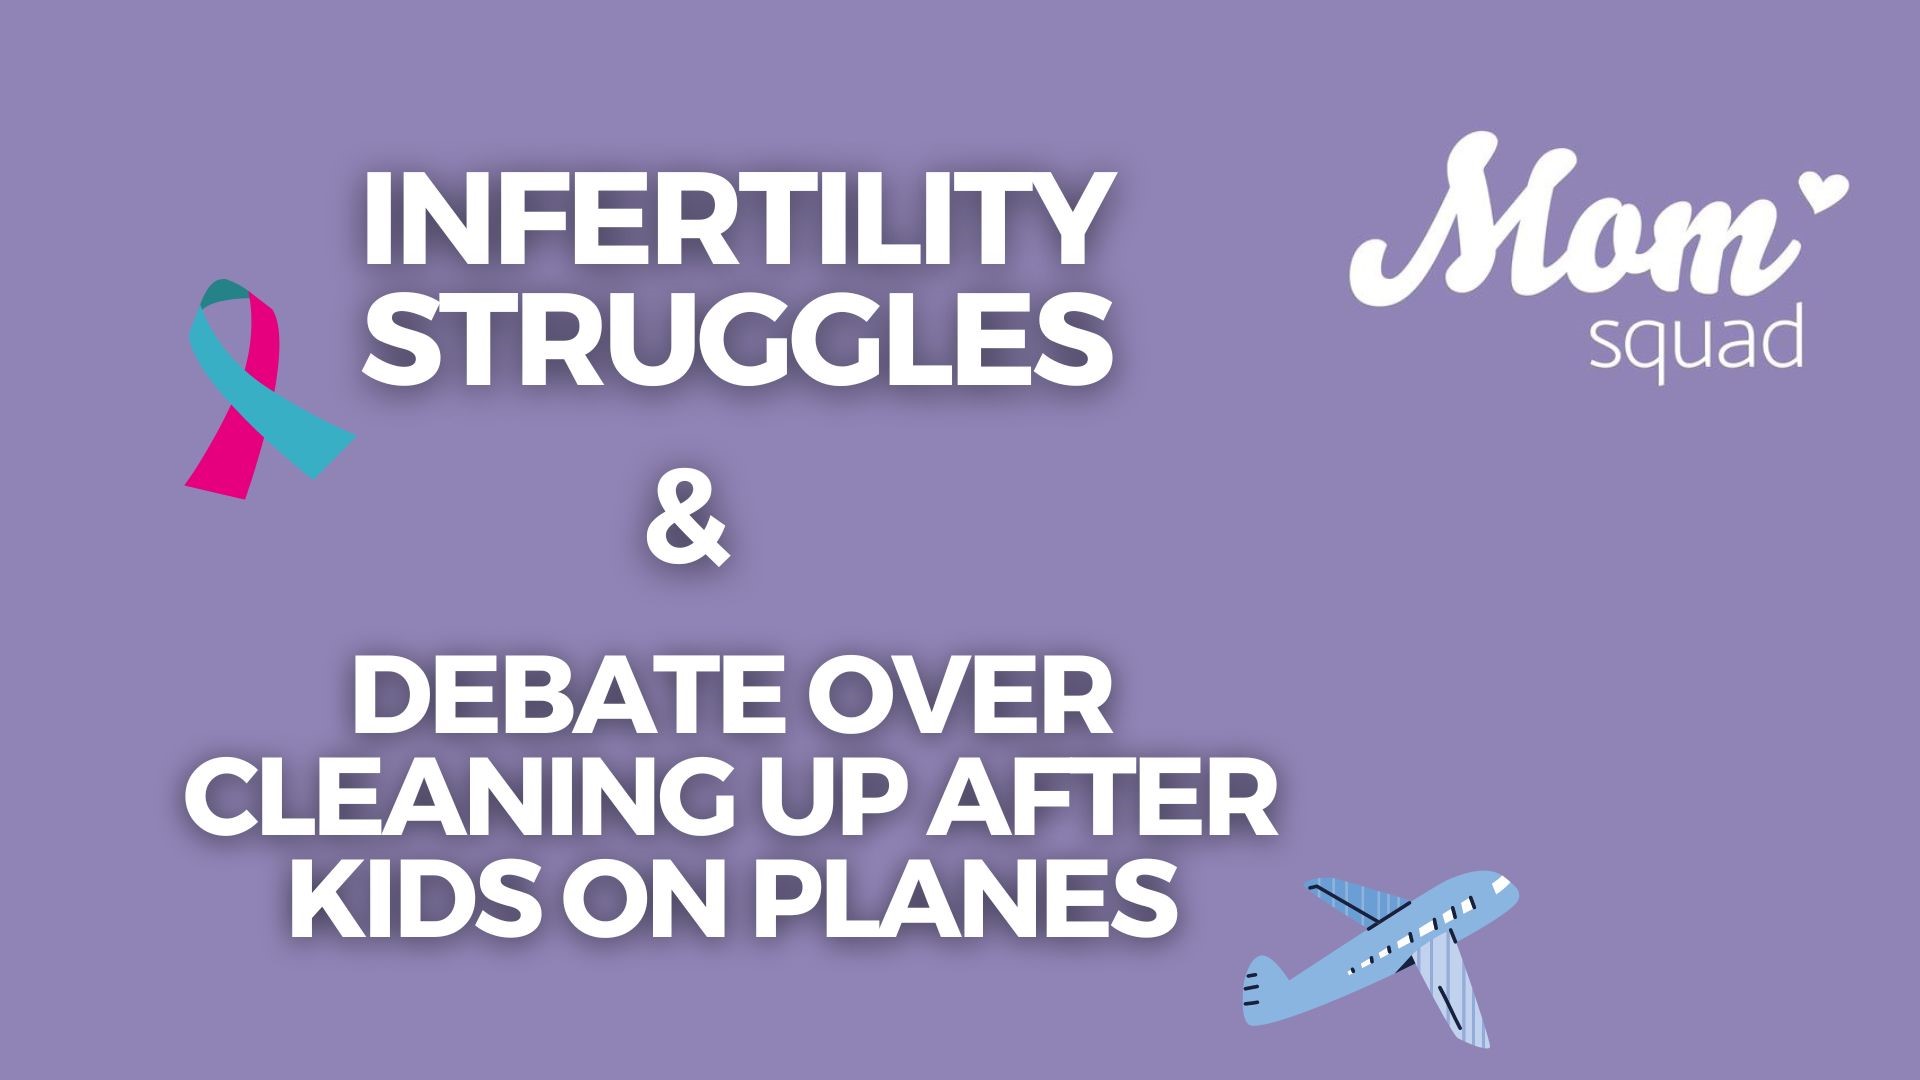 WKYC's Maureen Kyle speaks with a doctor about infertility and some of the possible causes. Plus the viral debate over cleaning up after your kids on planes.